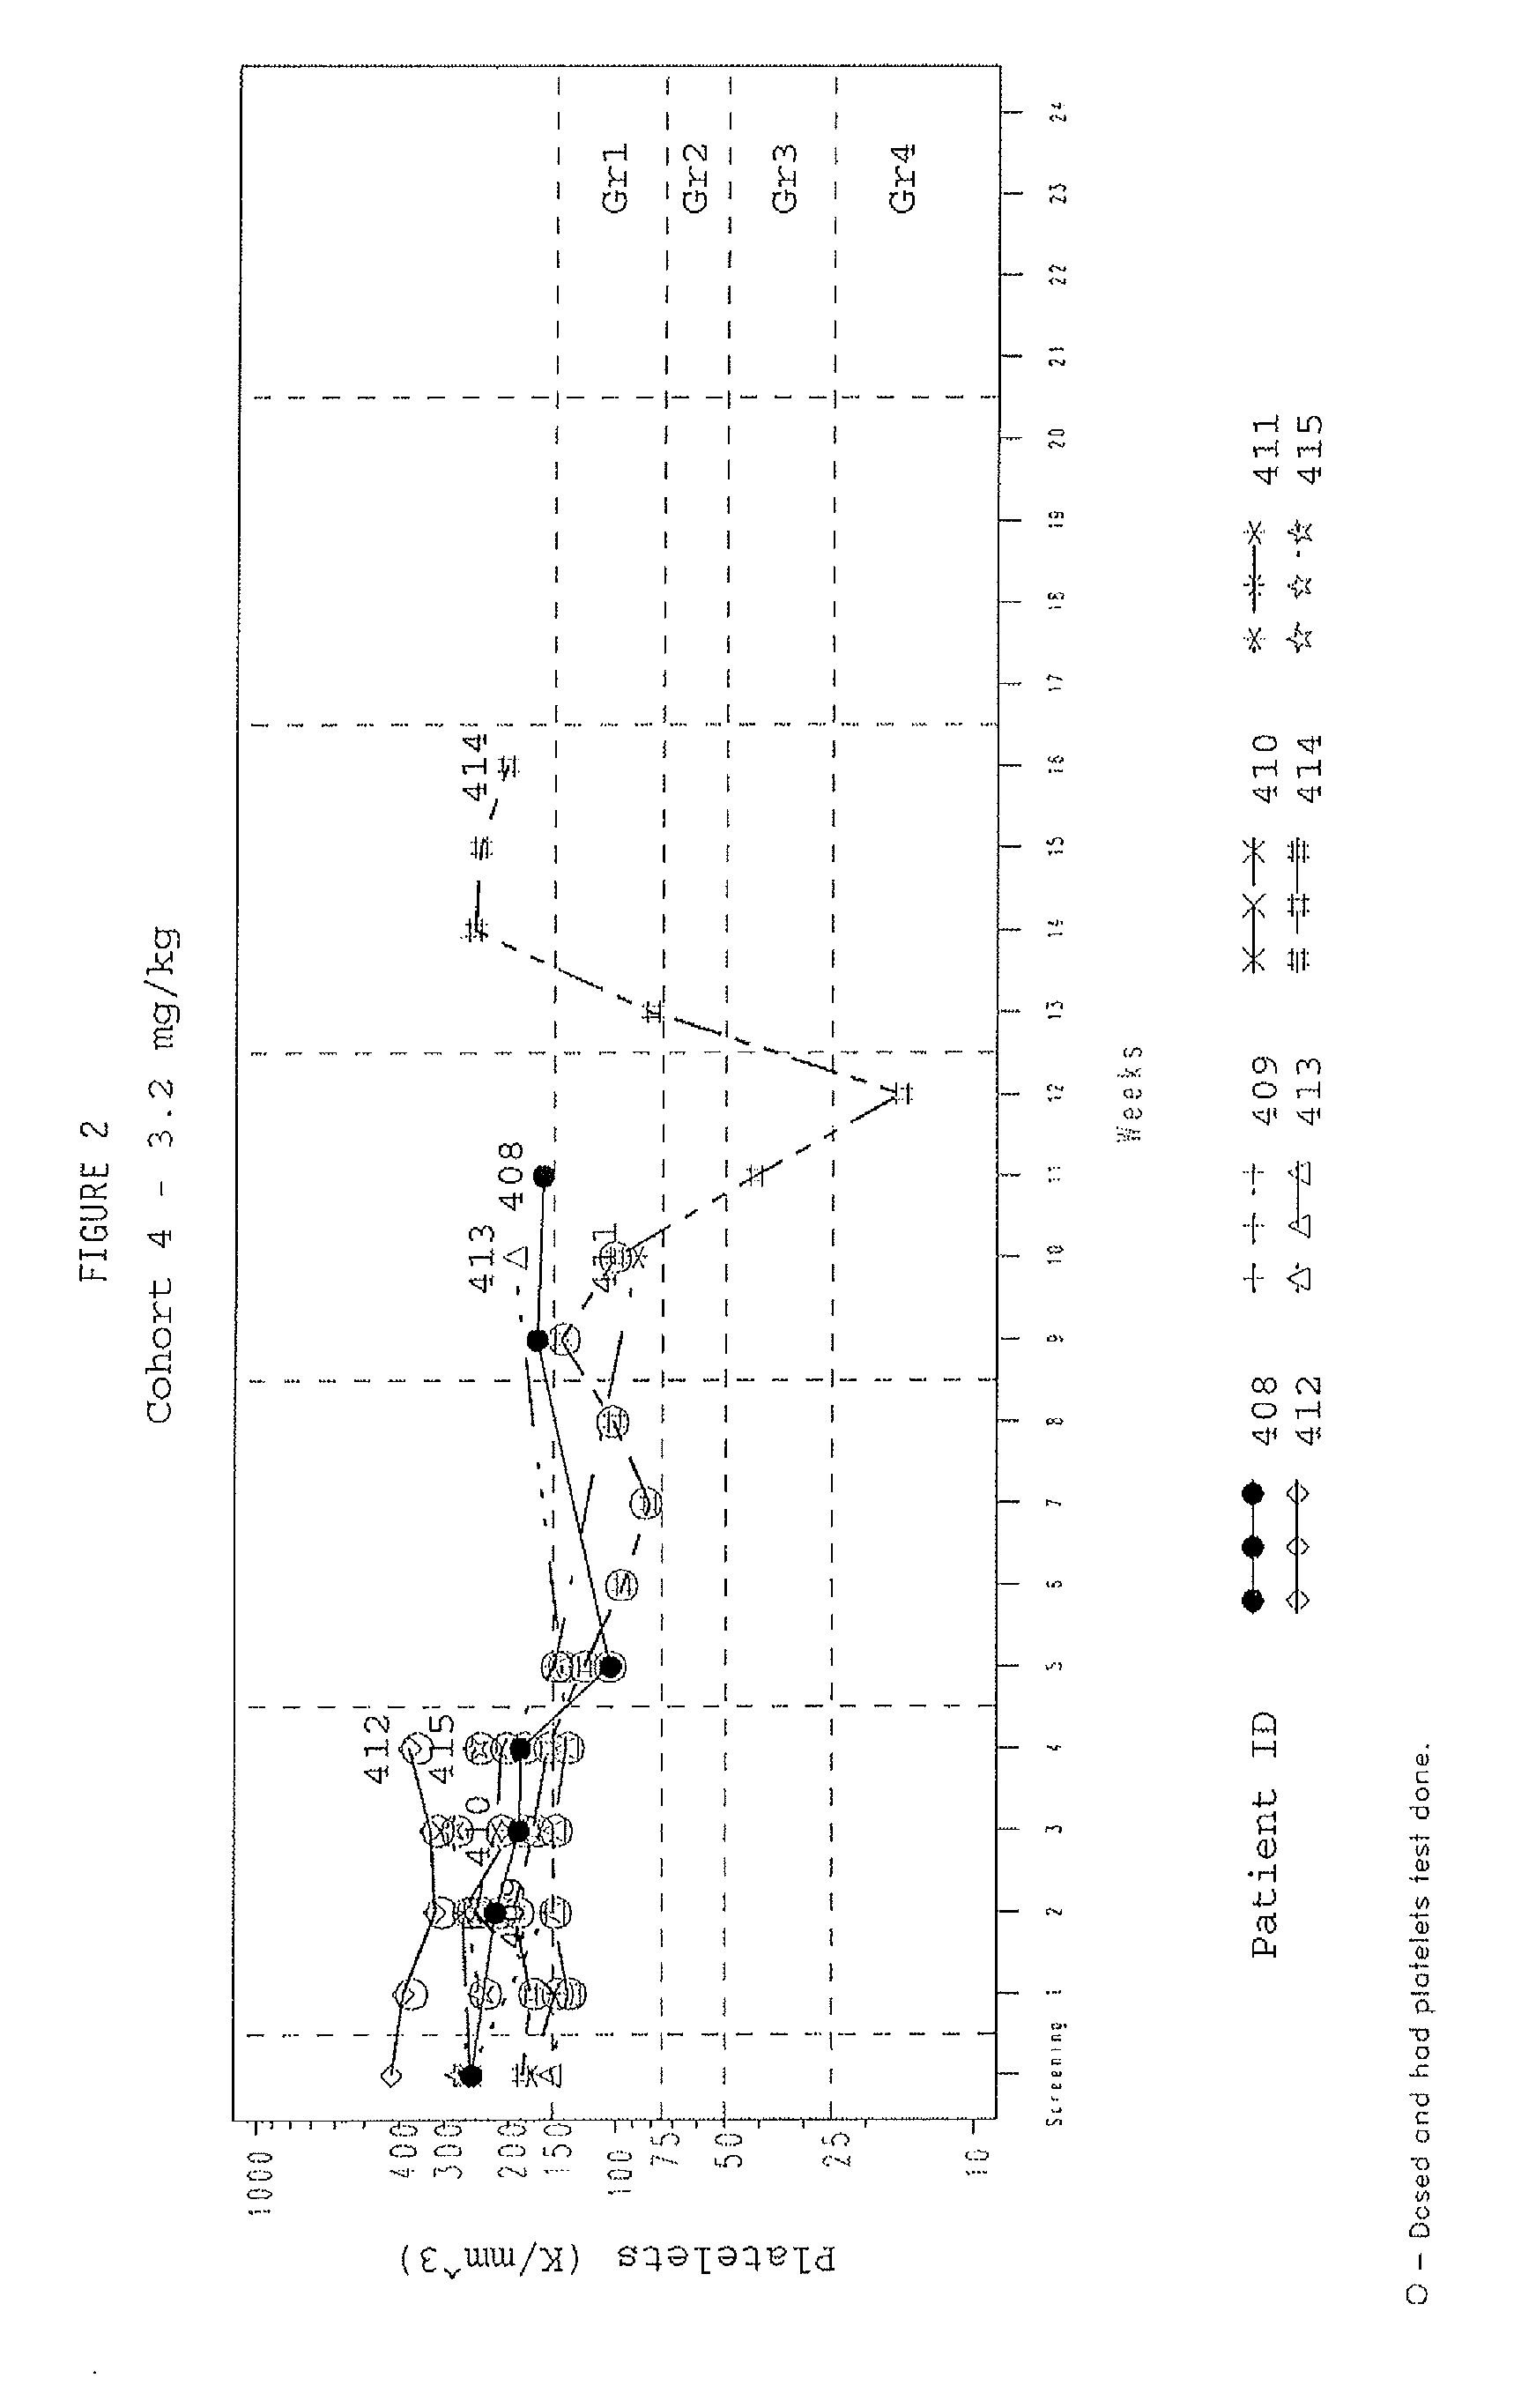 Method for Identification of Sensitivity of a Patient to Telomerase Inhibition Therapy